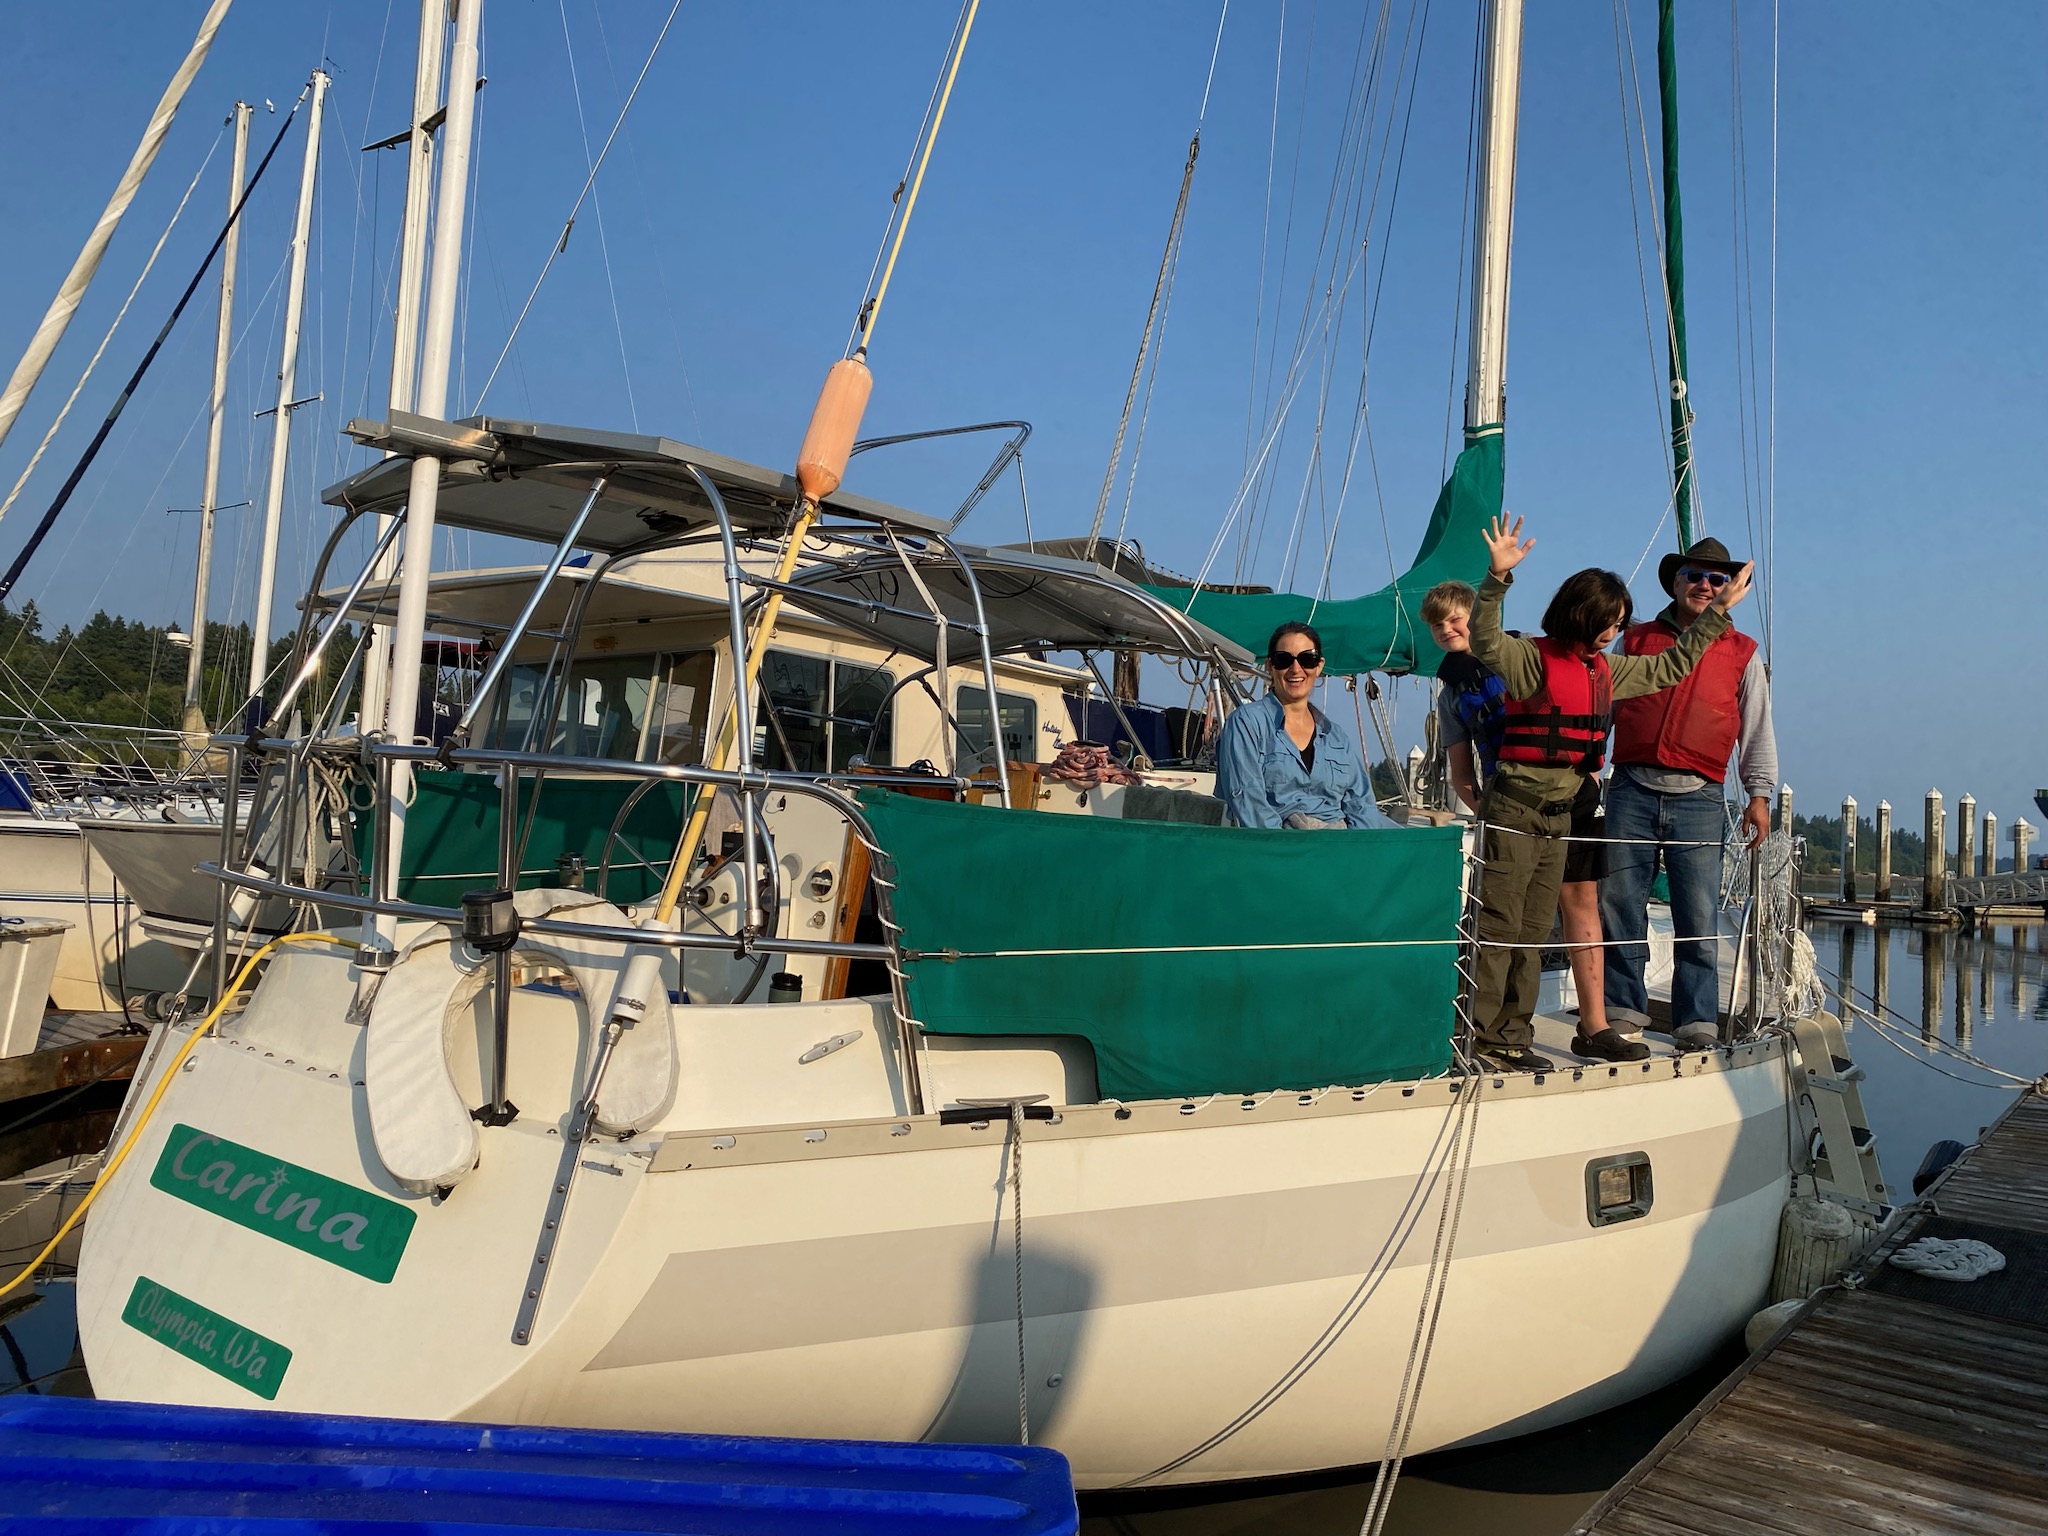 Sailboat with scouts on it at the dock